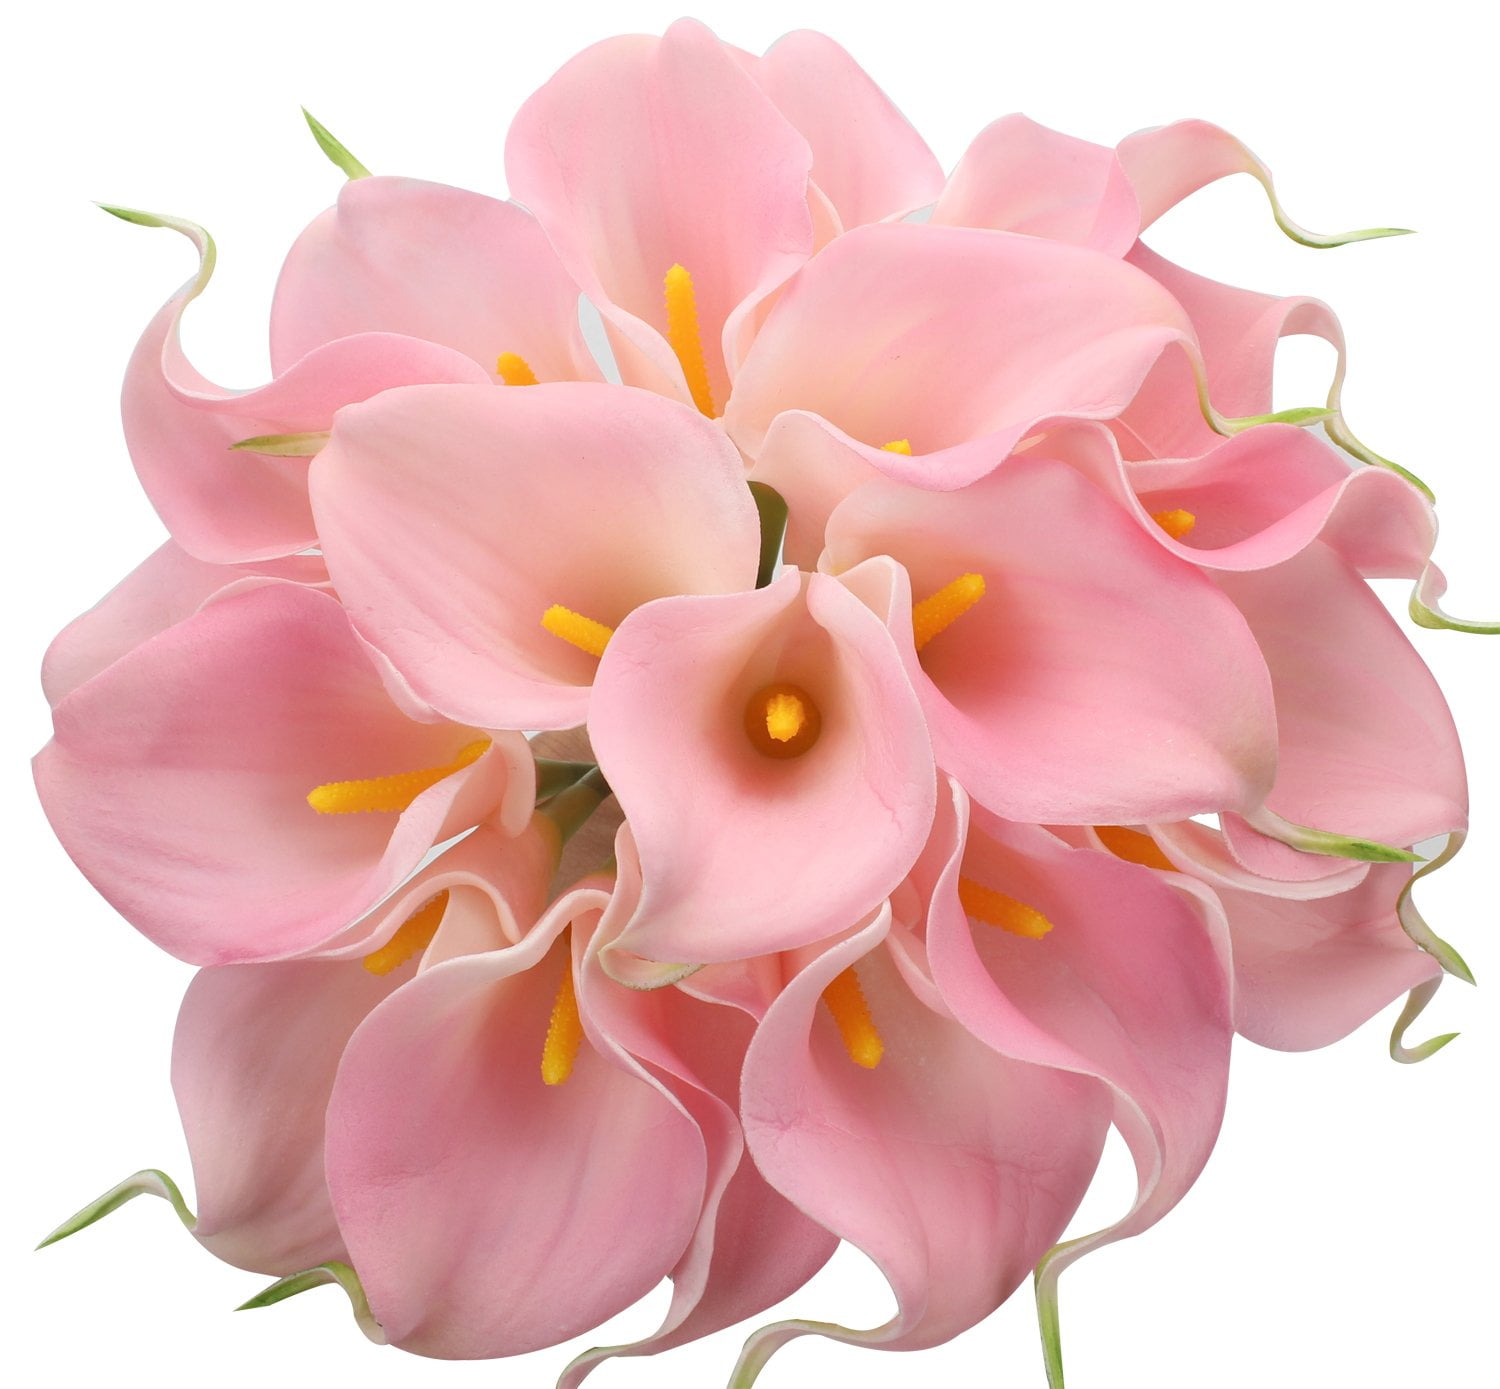 WEDDING BOUQUET FLOWER LATEX REAL TOUCH CALLA LILY CREAM PINK ARTIFICIAL 18 HEAD